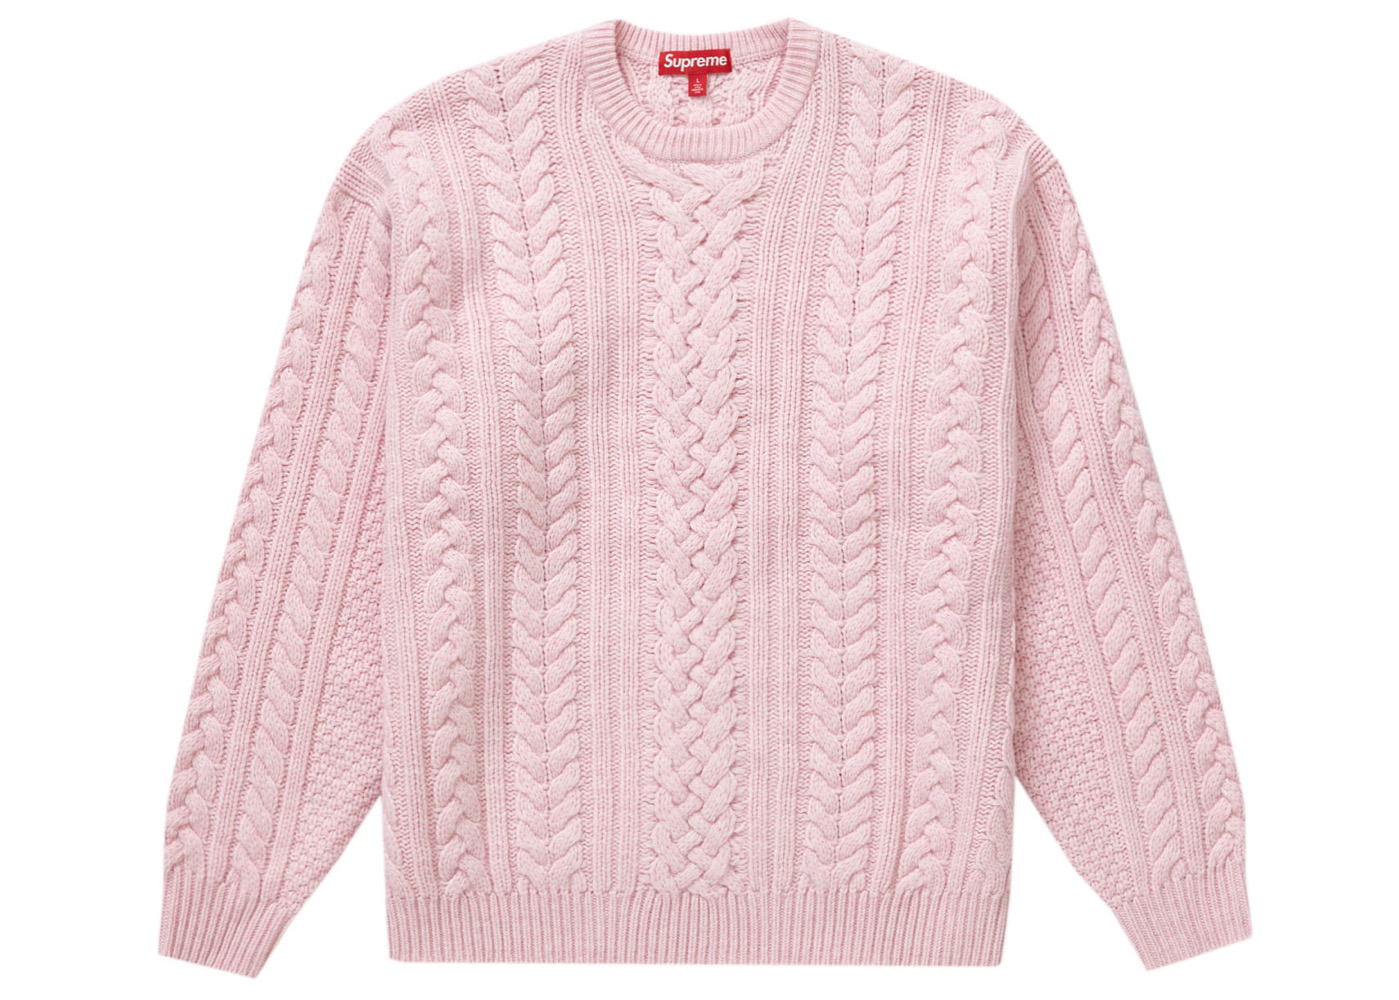 Supreme Applique Cable Knit Sweater pink袖丈長袖